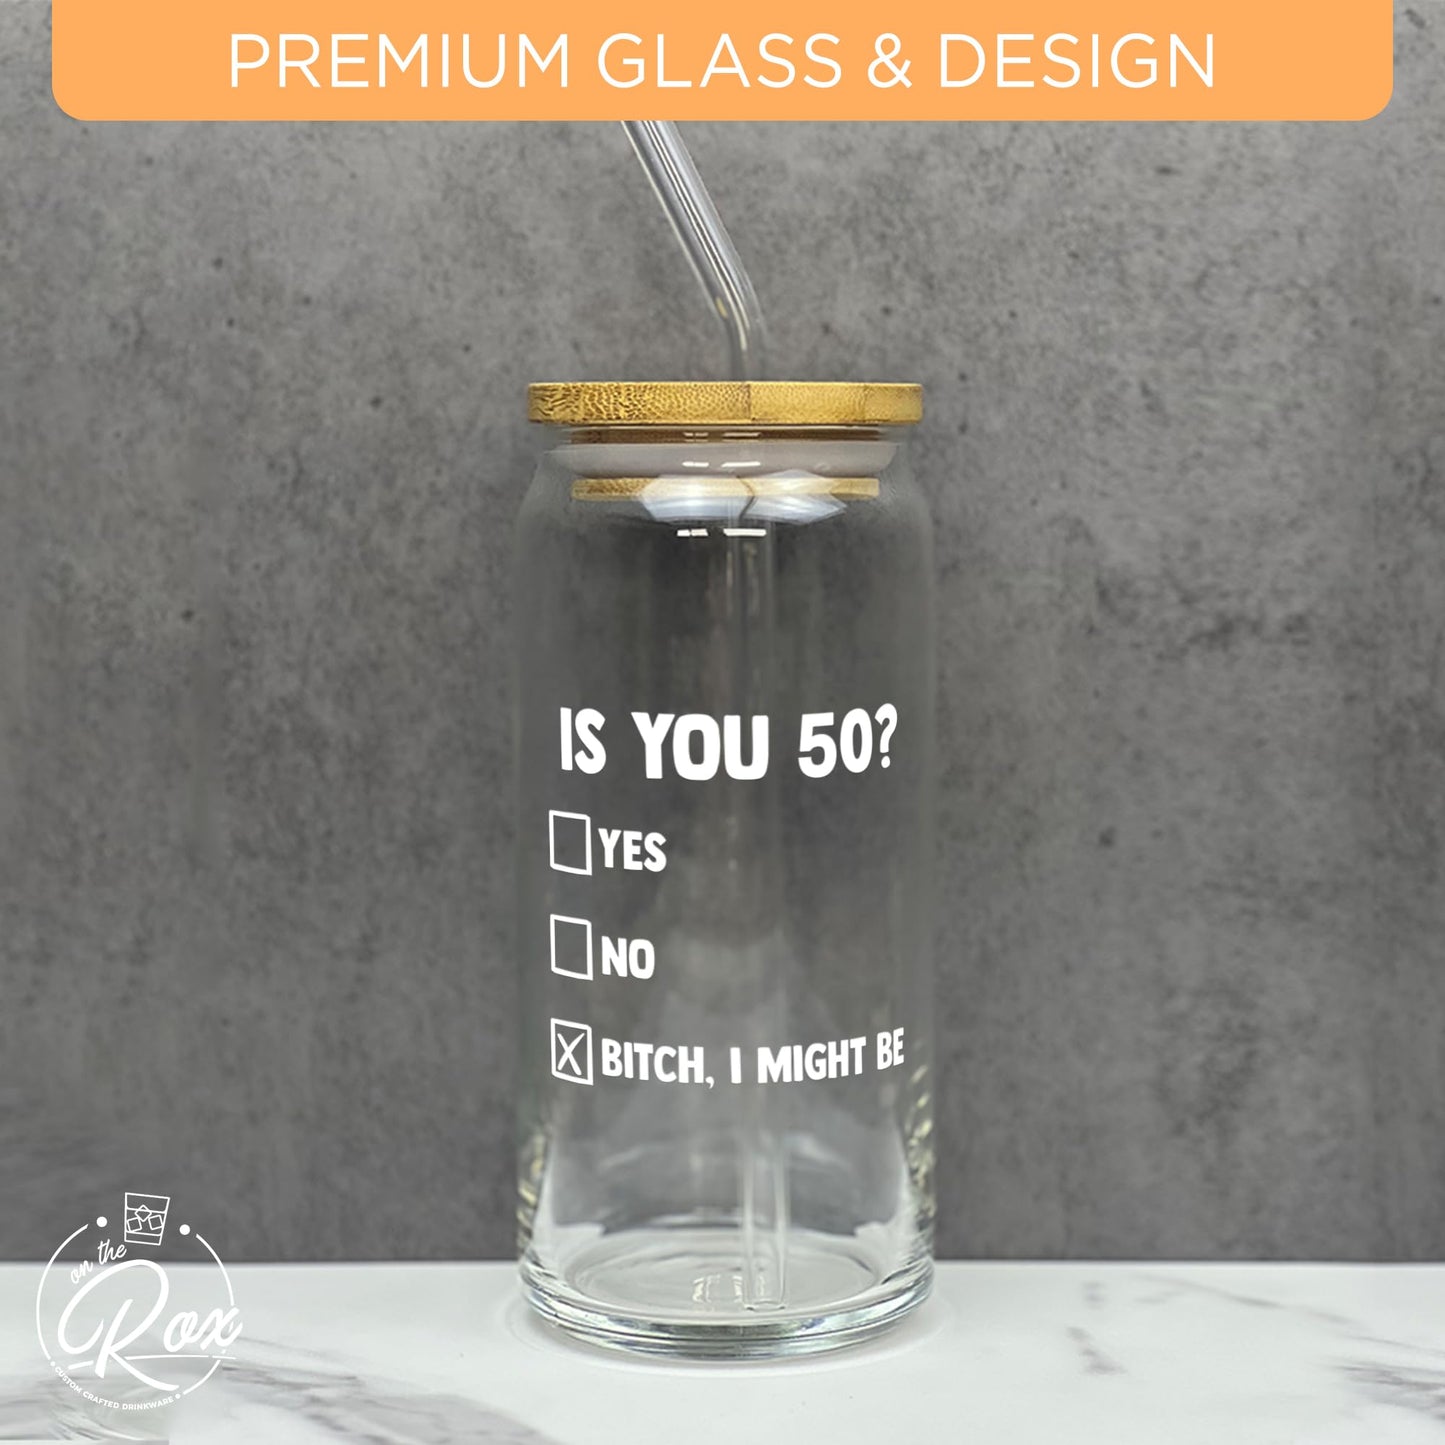 50th Birthday Gifts For Women - “Is You 50?” Soda Can Glass 20oz  w/ Bamboo Lid & Glass Straw Set